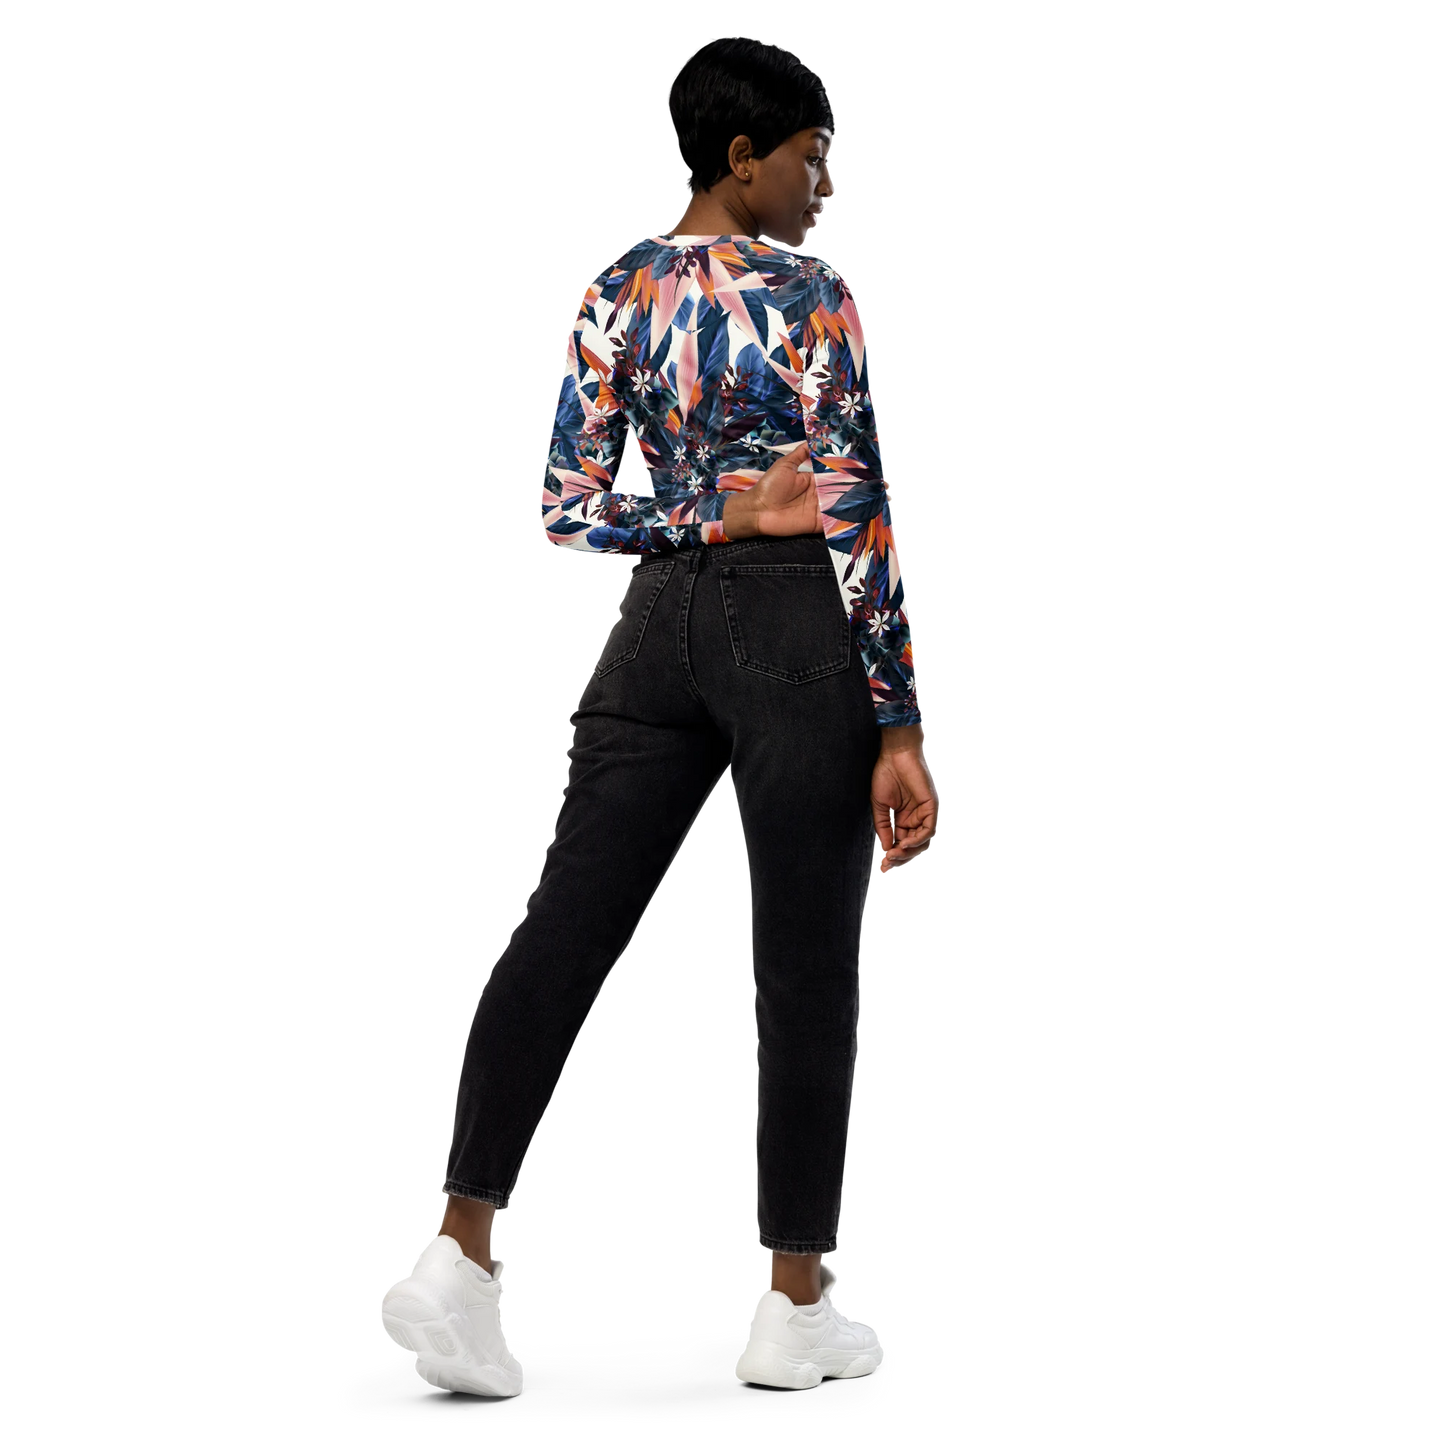 Tropical Beauty Recycled Long-sleeve Crop Top